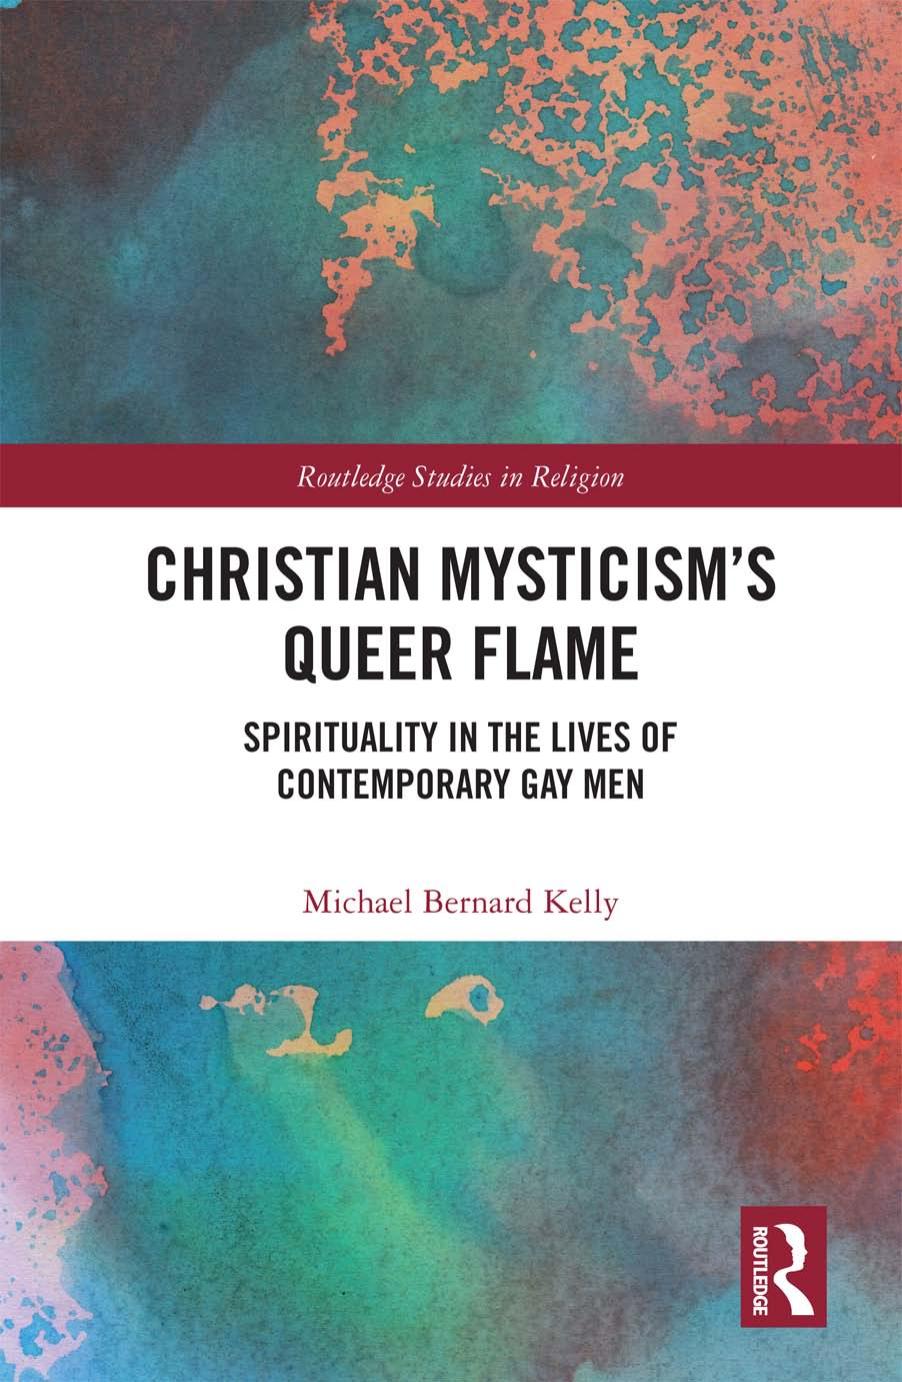 Christian Mysticism's Queer Flame: Spirituality in the Lives of Contemporary Gay Men